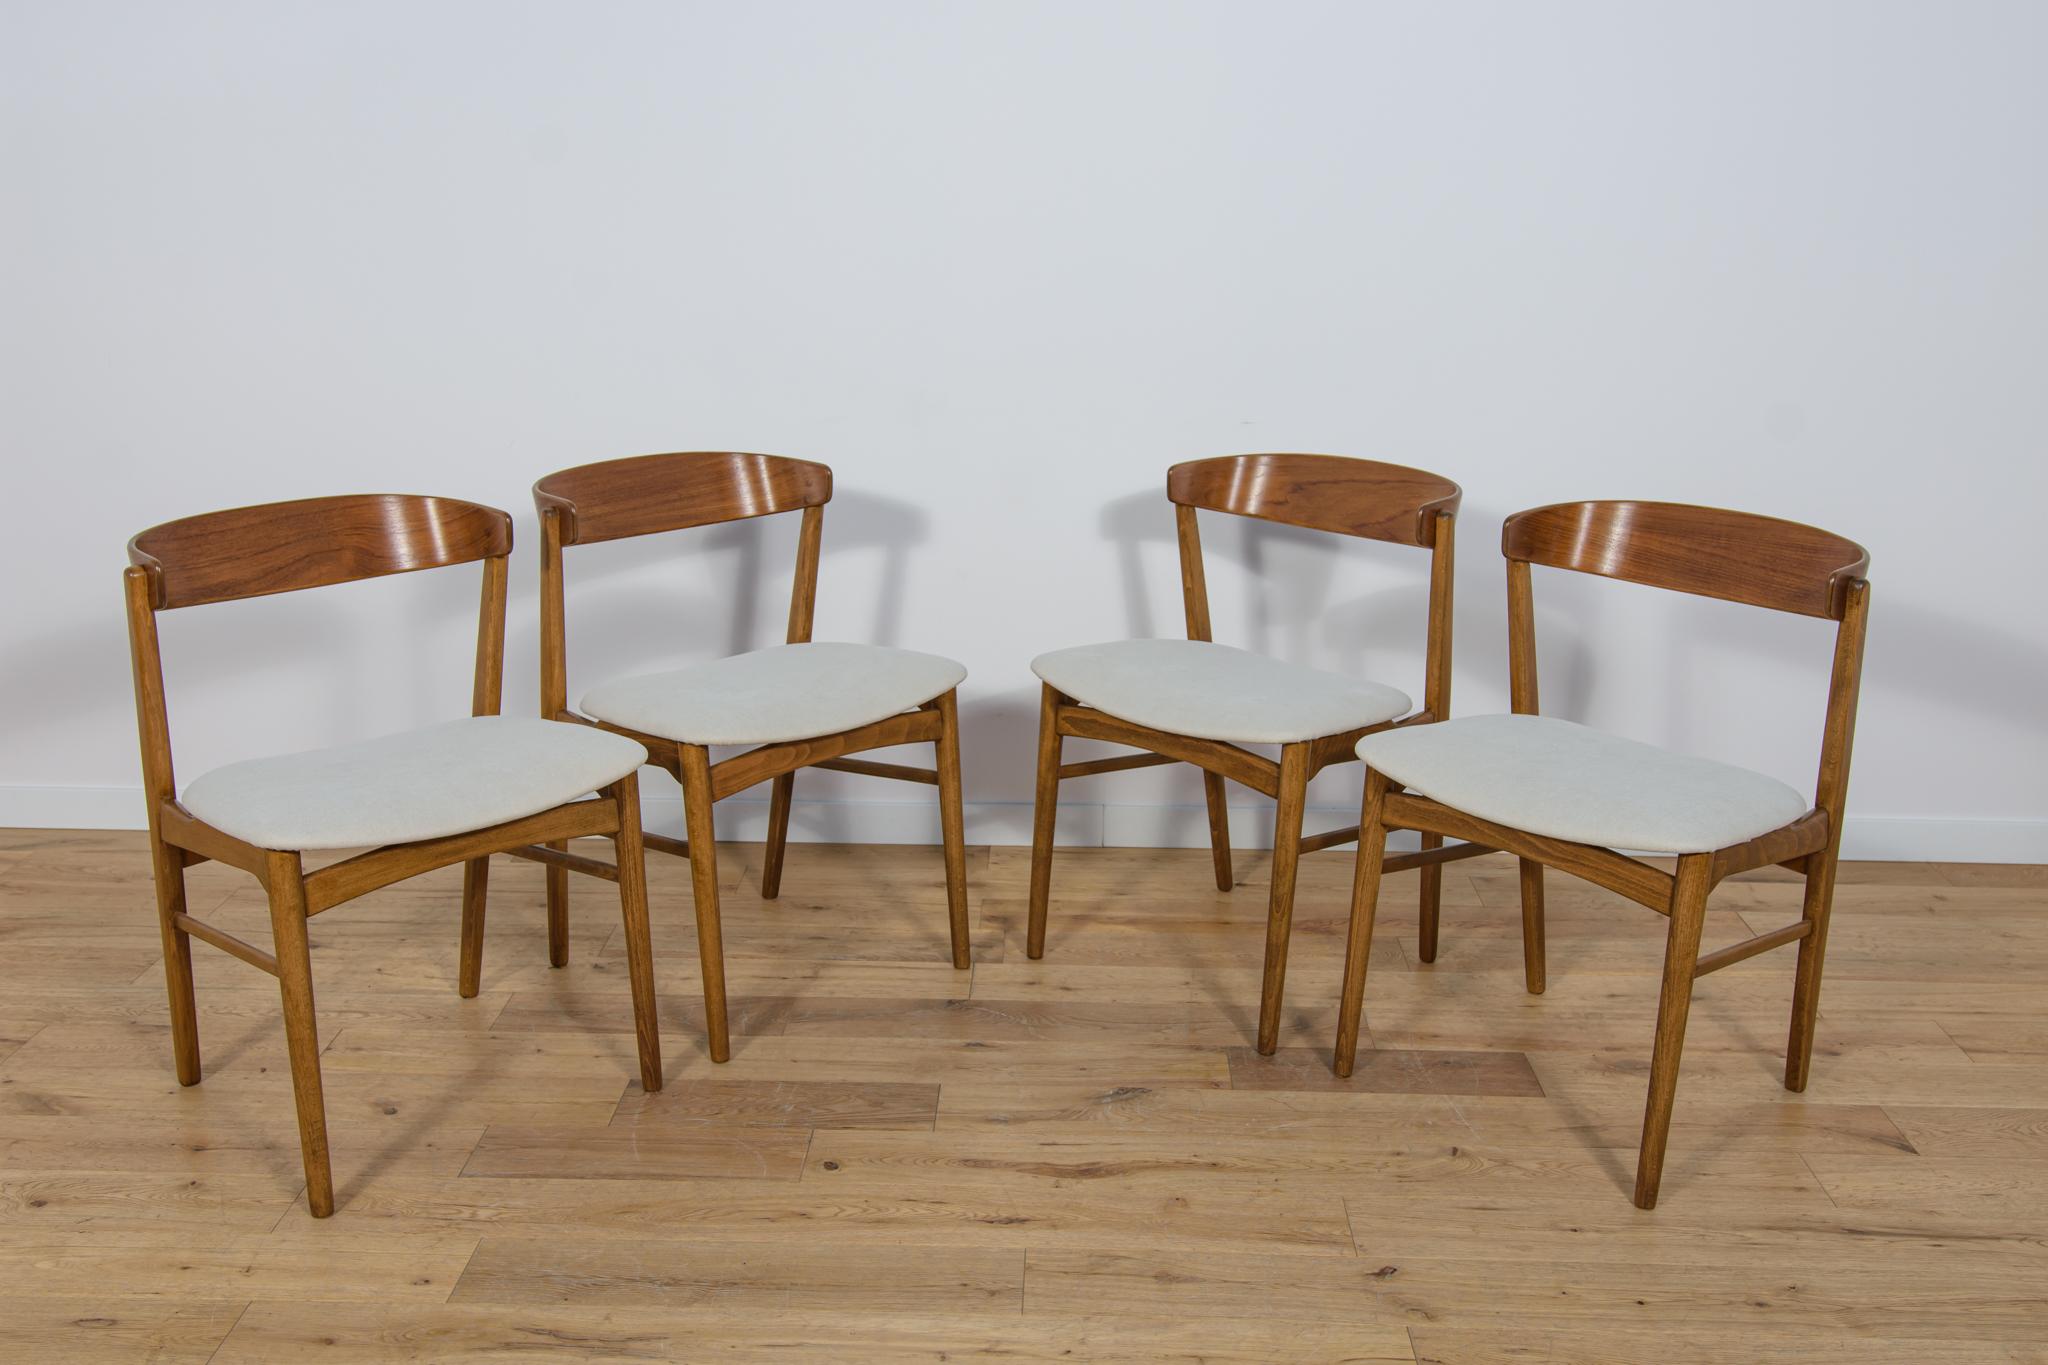 Danish Mid-Century Model 206 Dining Chairs from Farstrup Furniture, 1960s, Denmark. For Sale